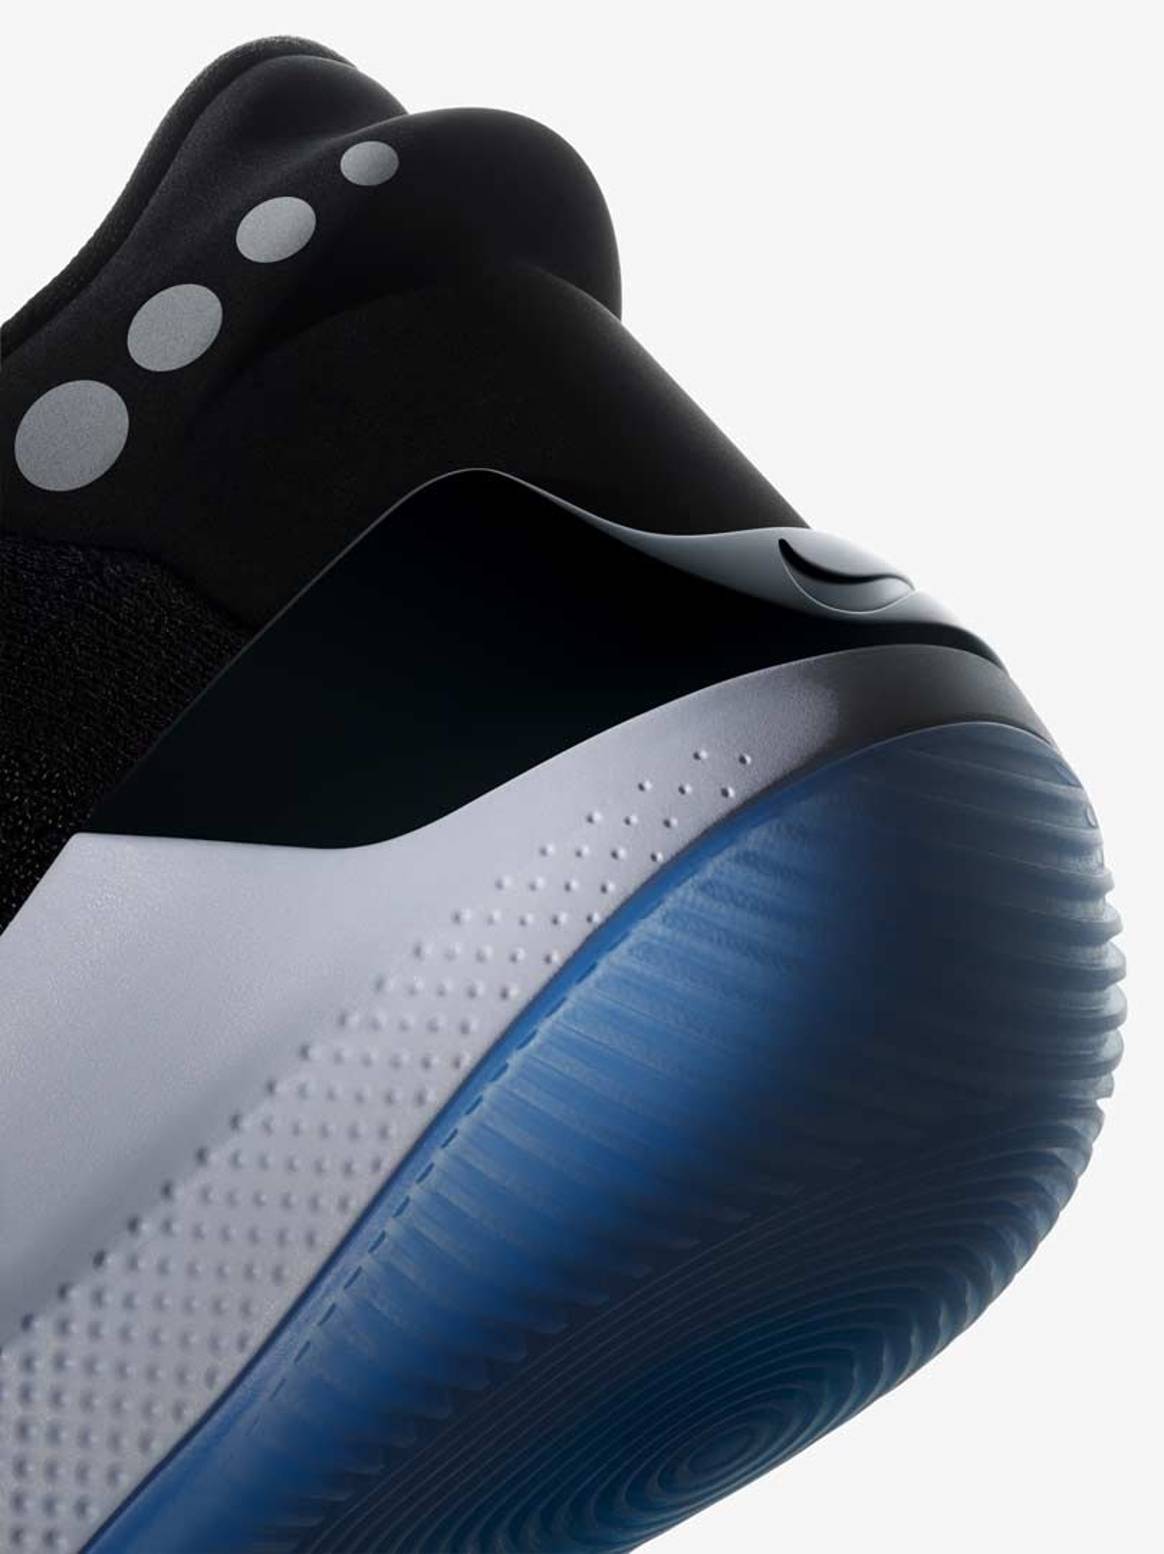 Nike unveils next-generation self-lacing basketball shoes